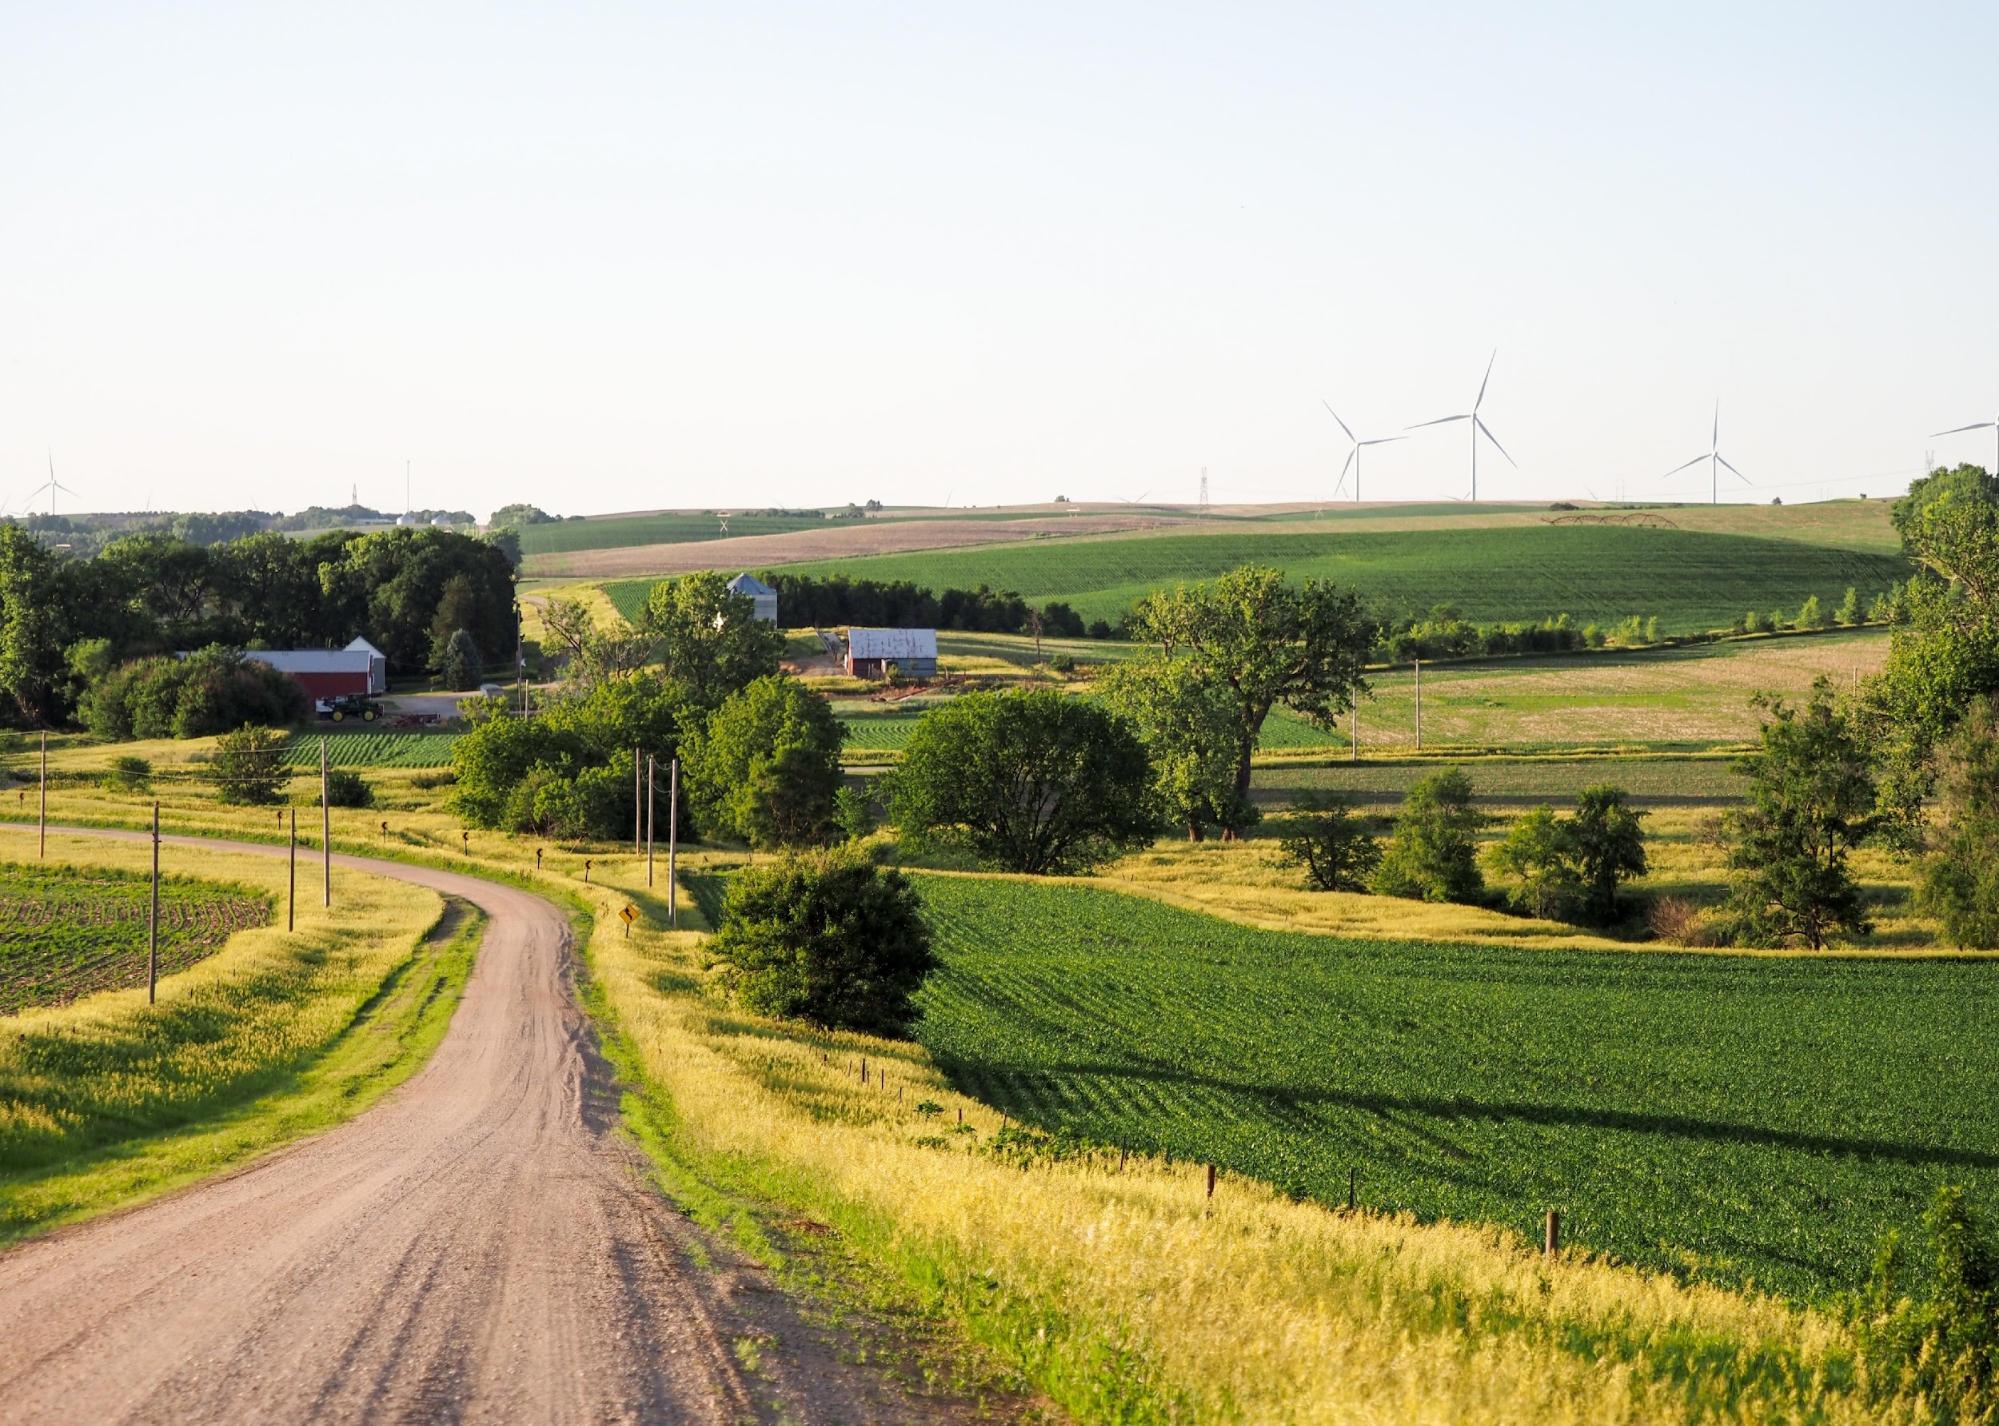 Windmills in distance behind farmland in rural countryside.